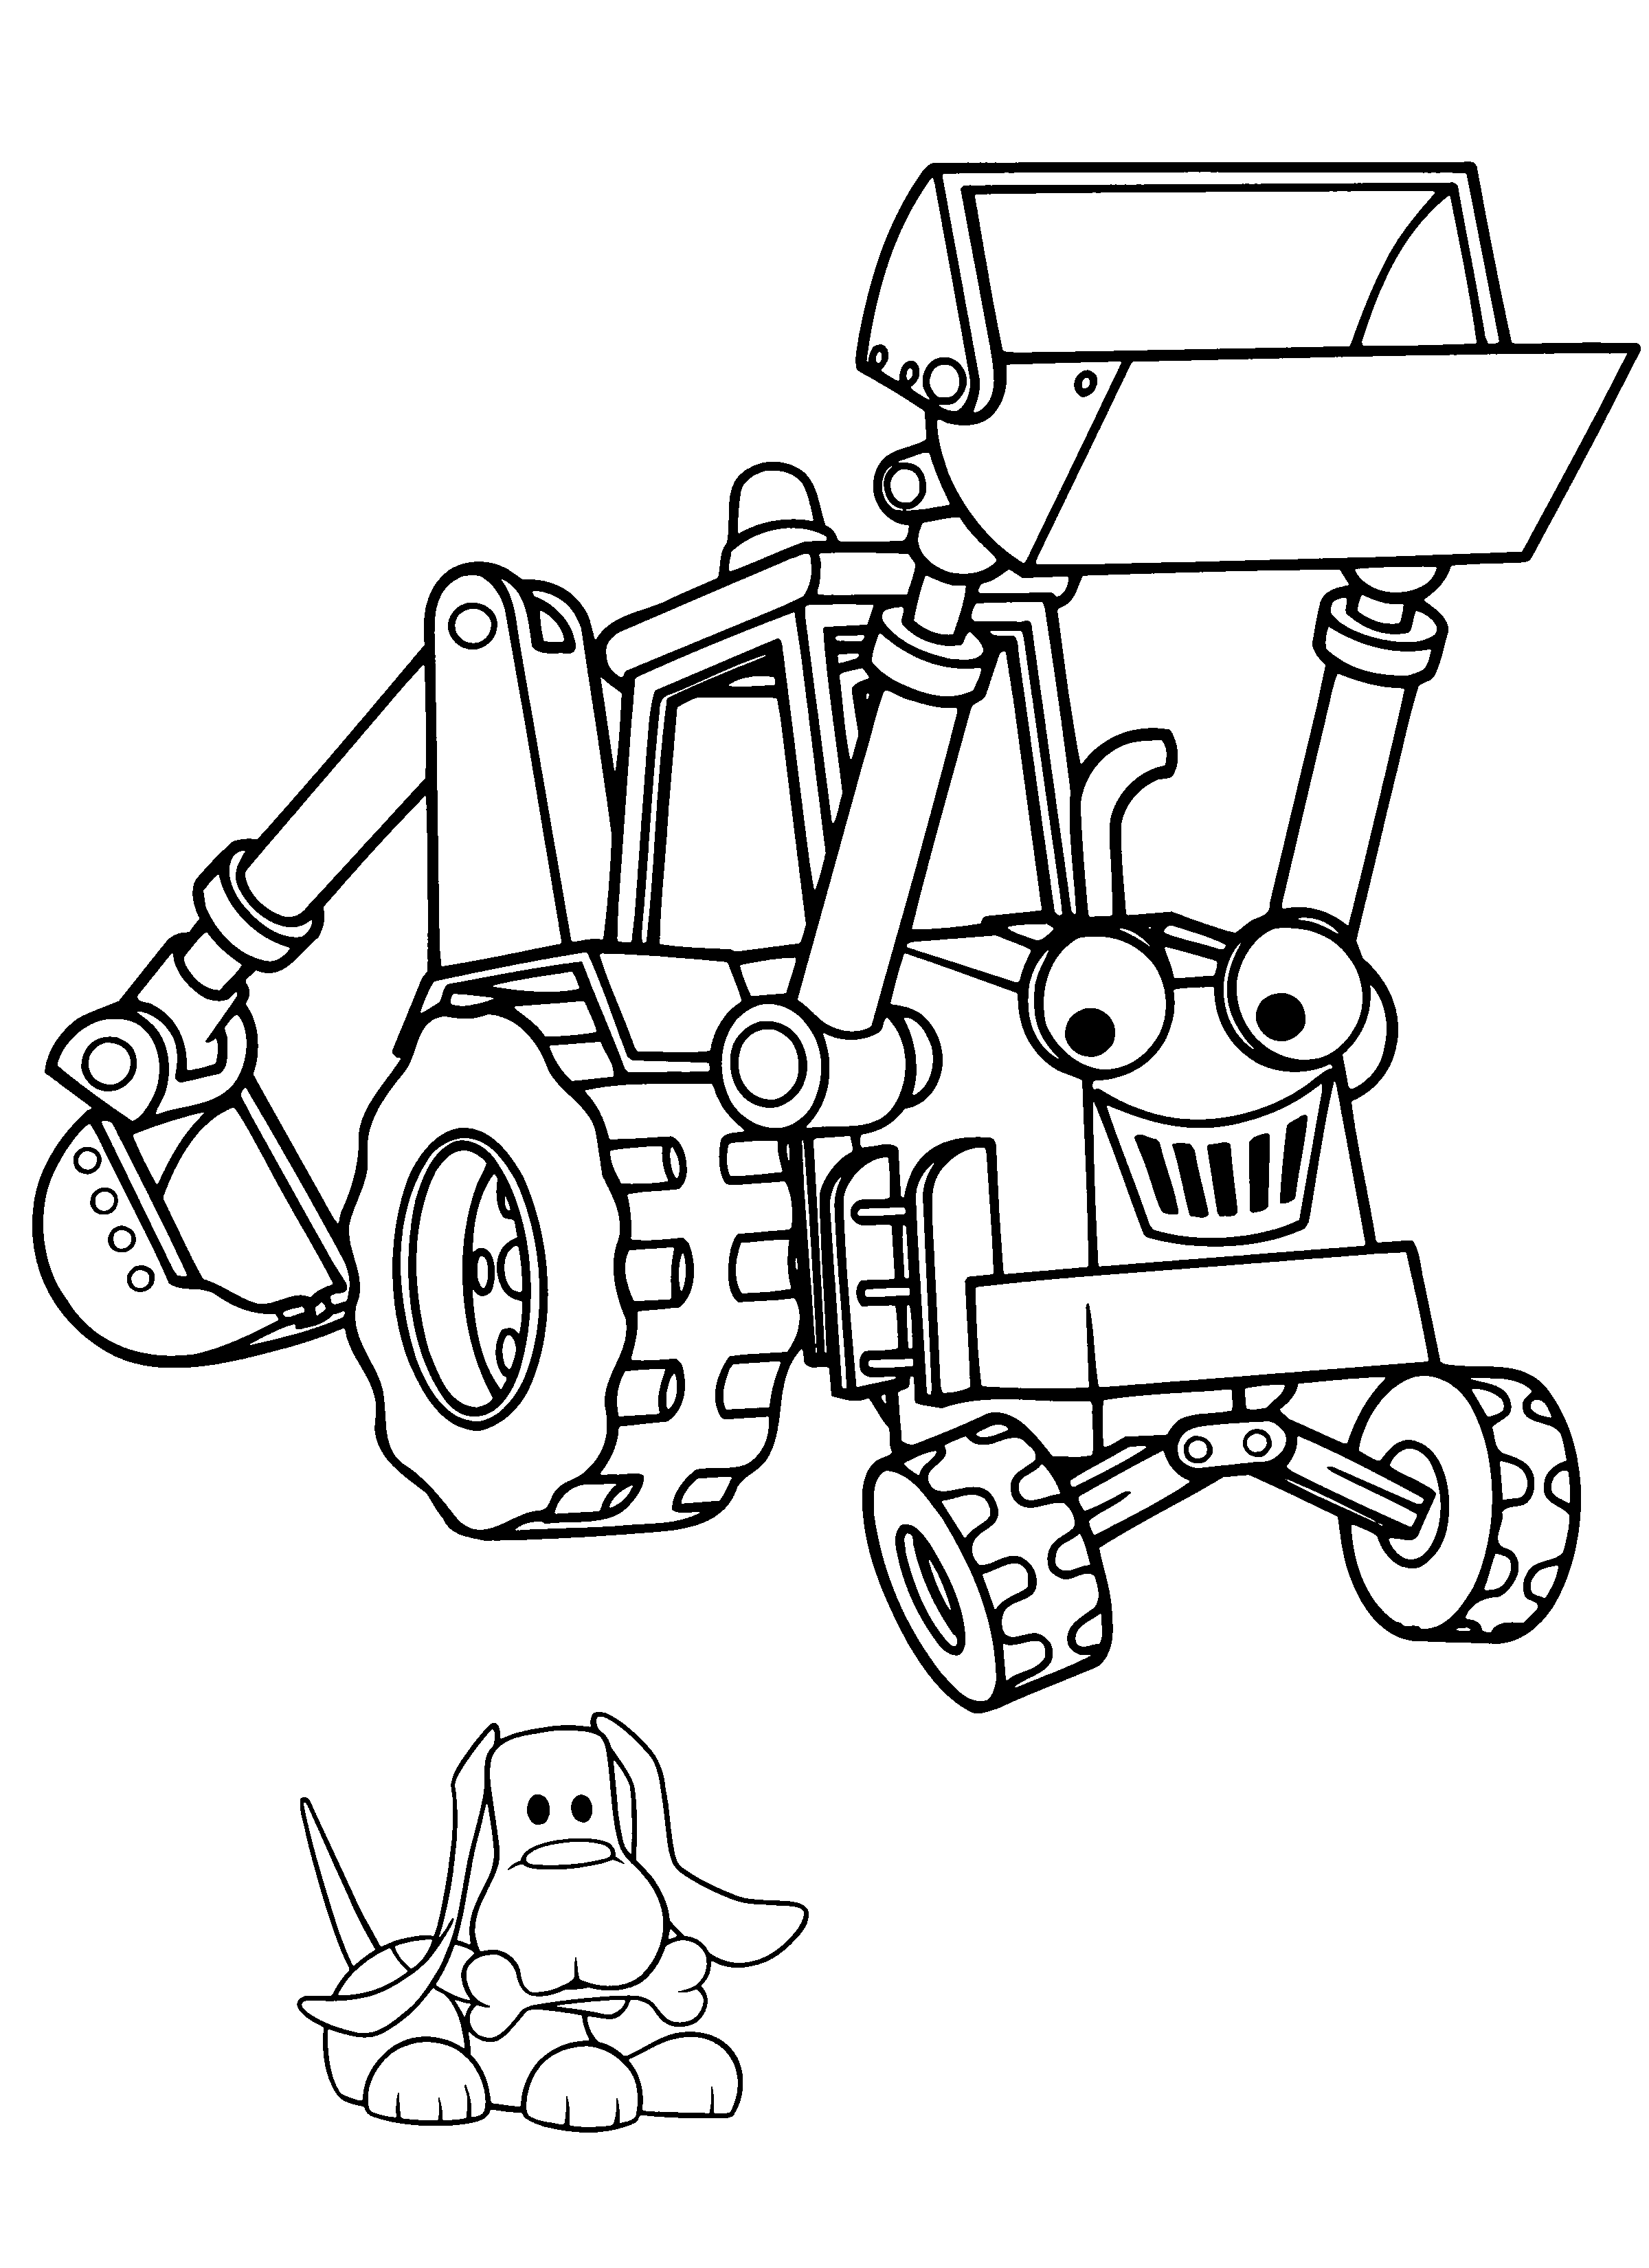 coloring-page-bob-the-builder-coloring-pages-33